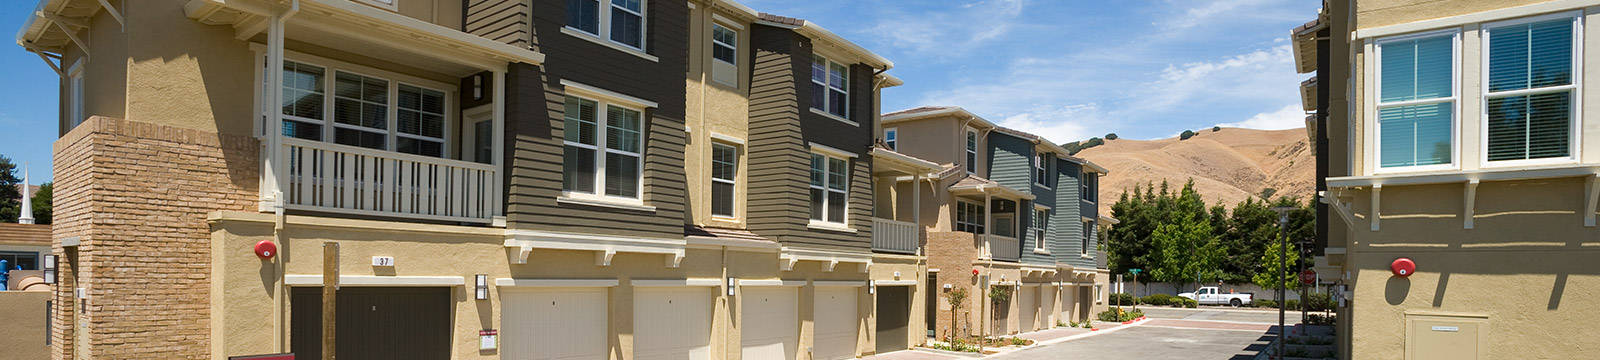 Large image of an exterior of a multi-family home properties next to each other.